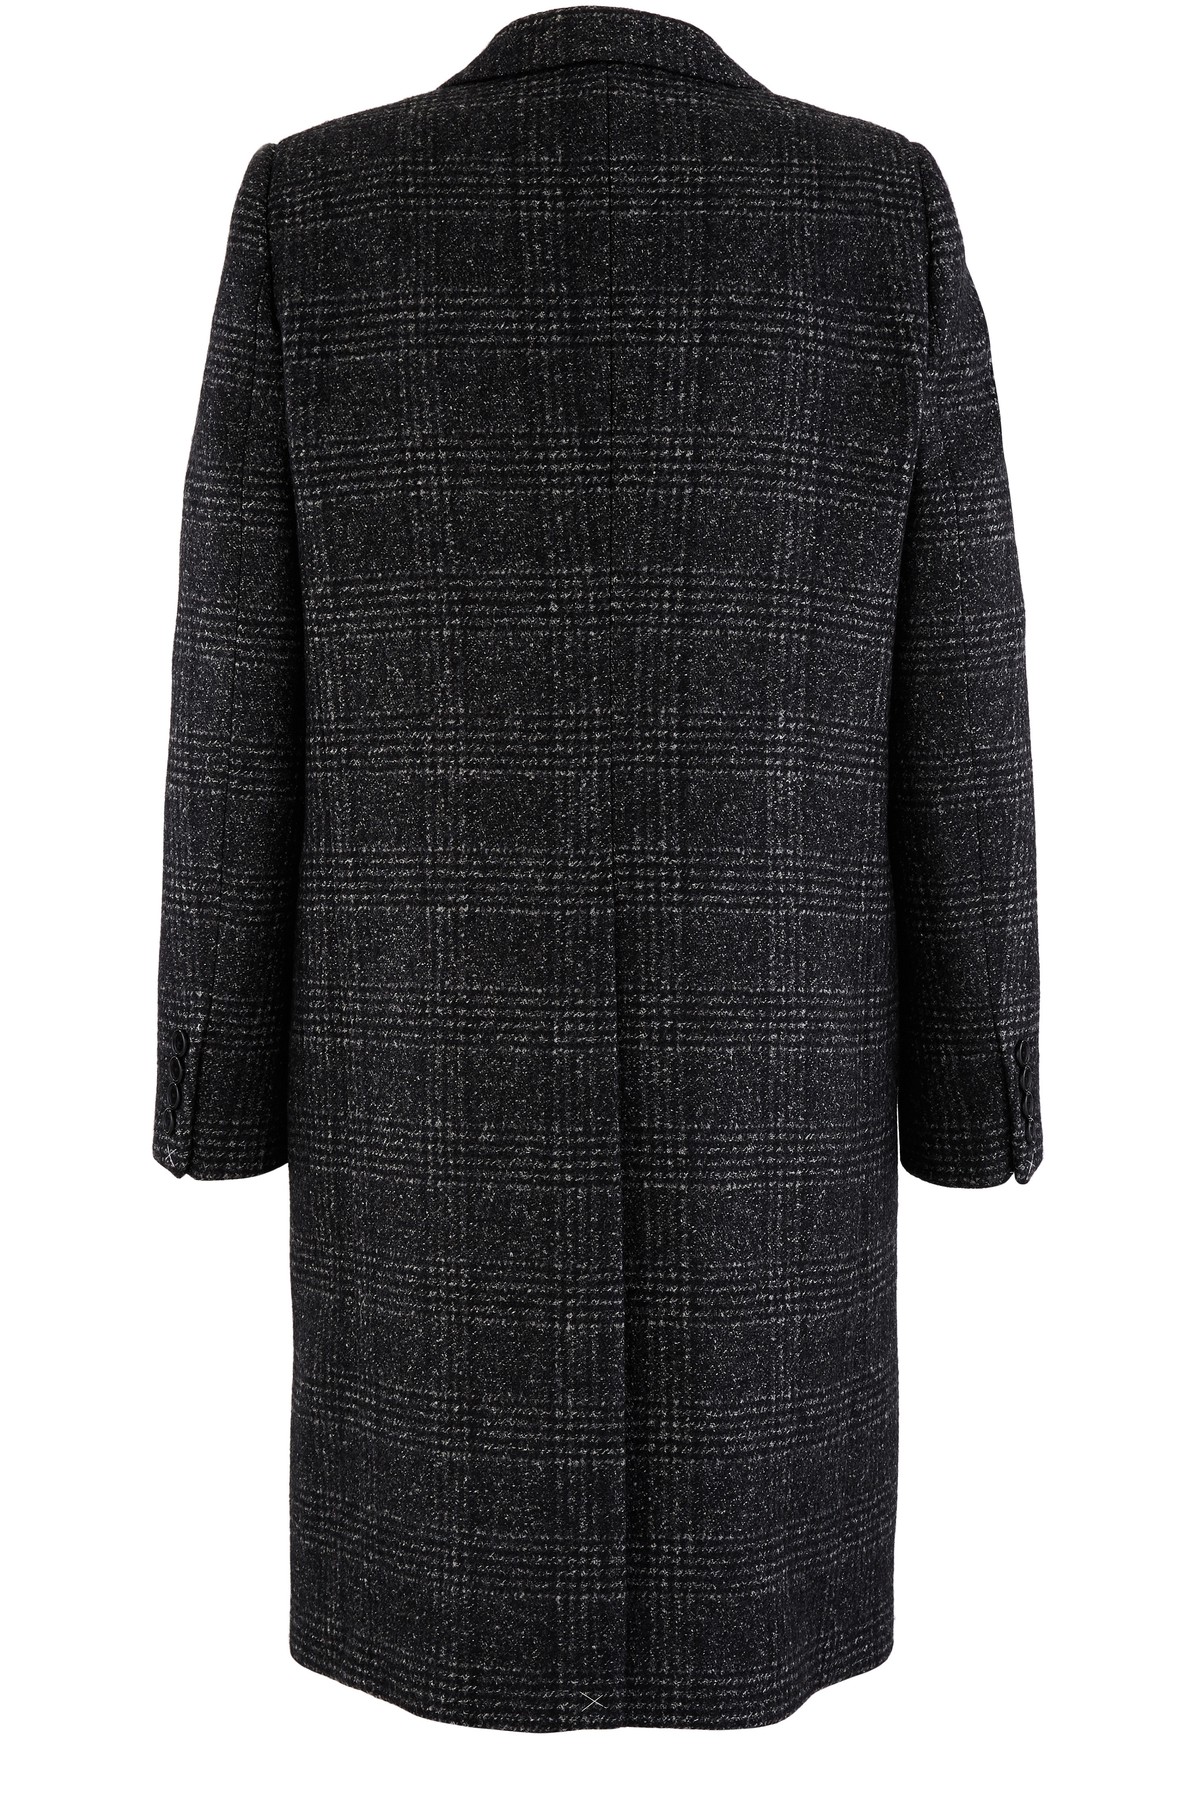 Celine Chesterfield Coat in Prince Of Wales Check